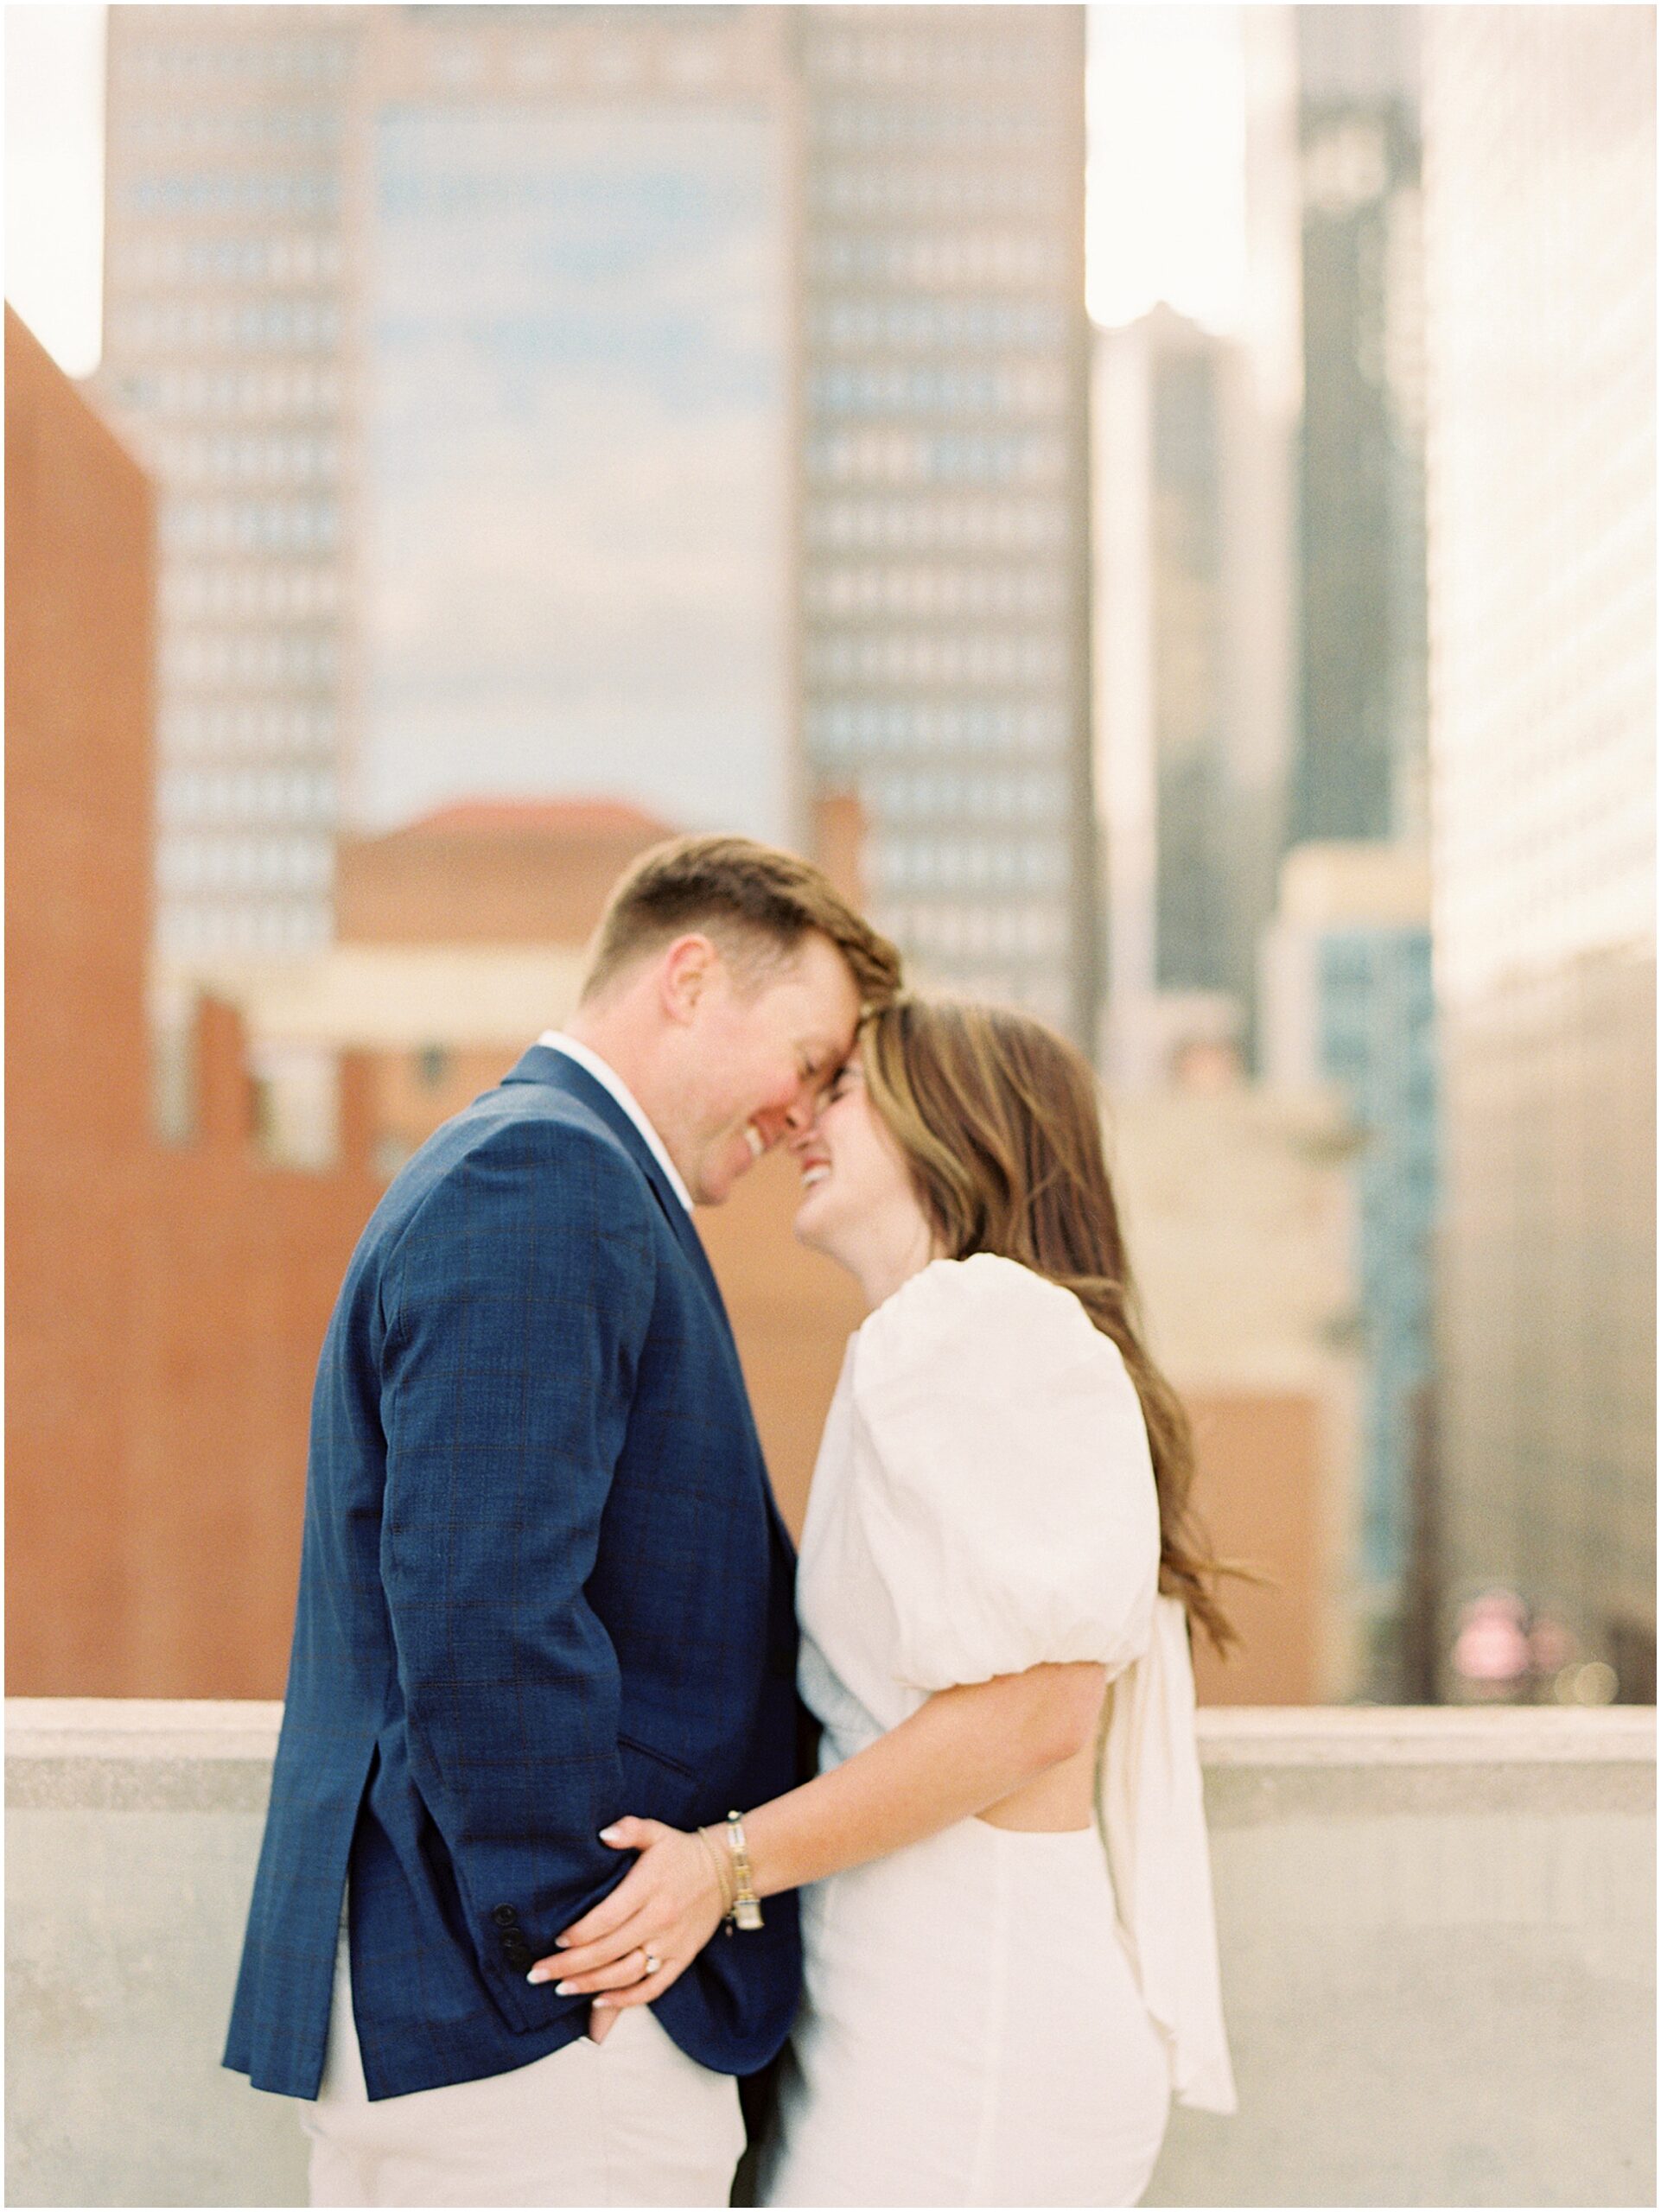 Rooftop Romance: Catherine and Jack Share a Tender Moment with the City Skyline